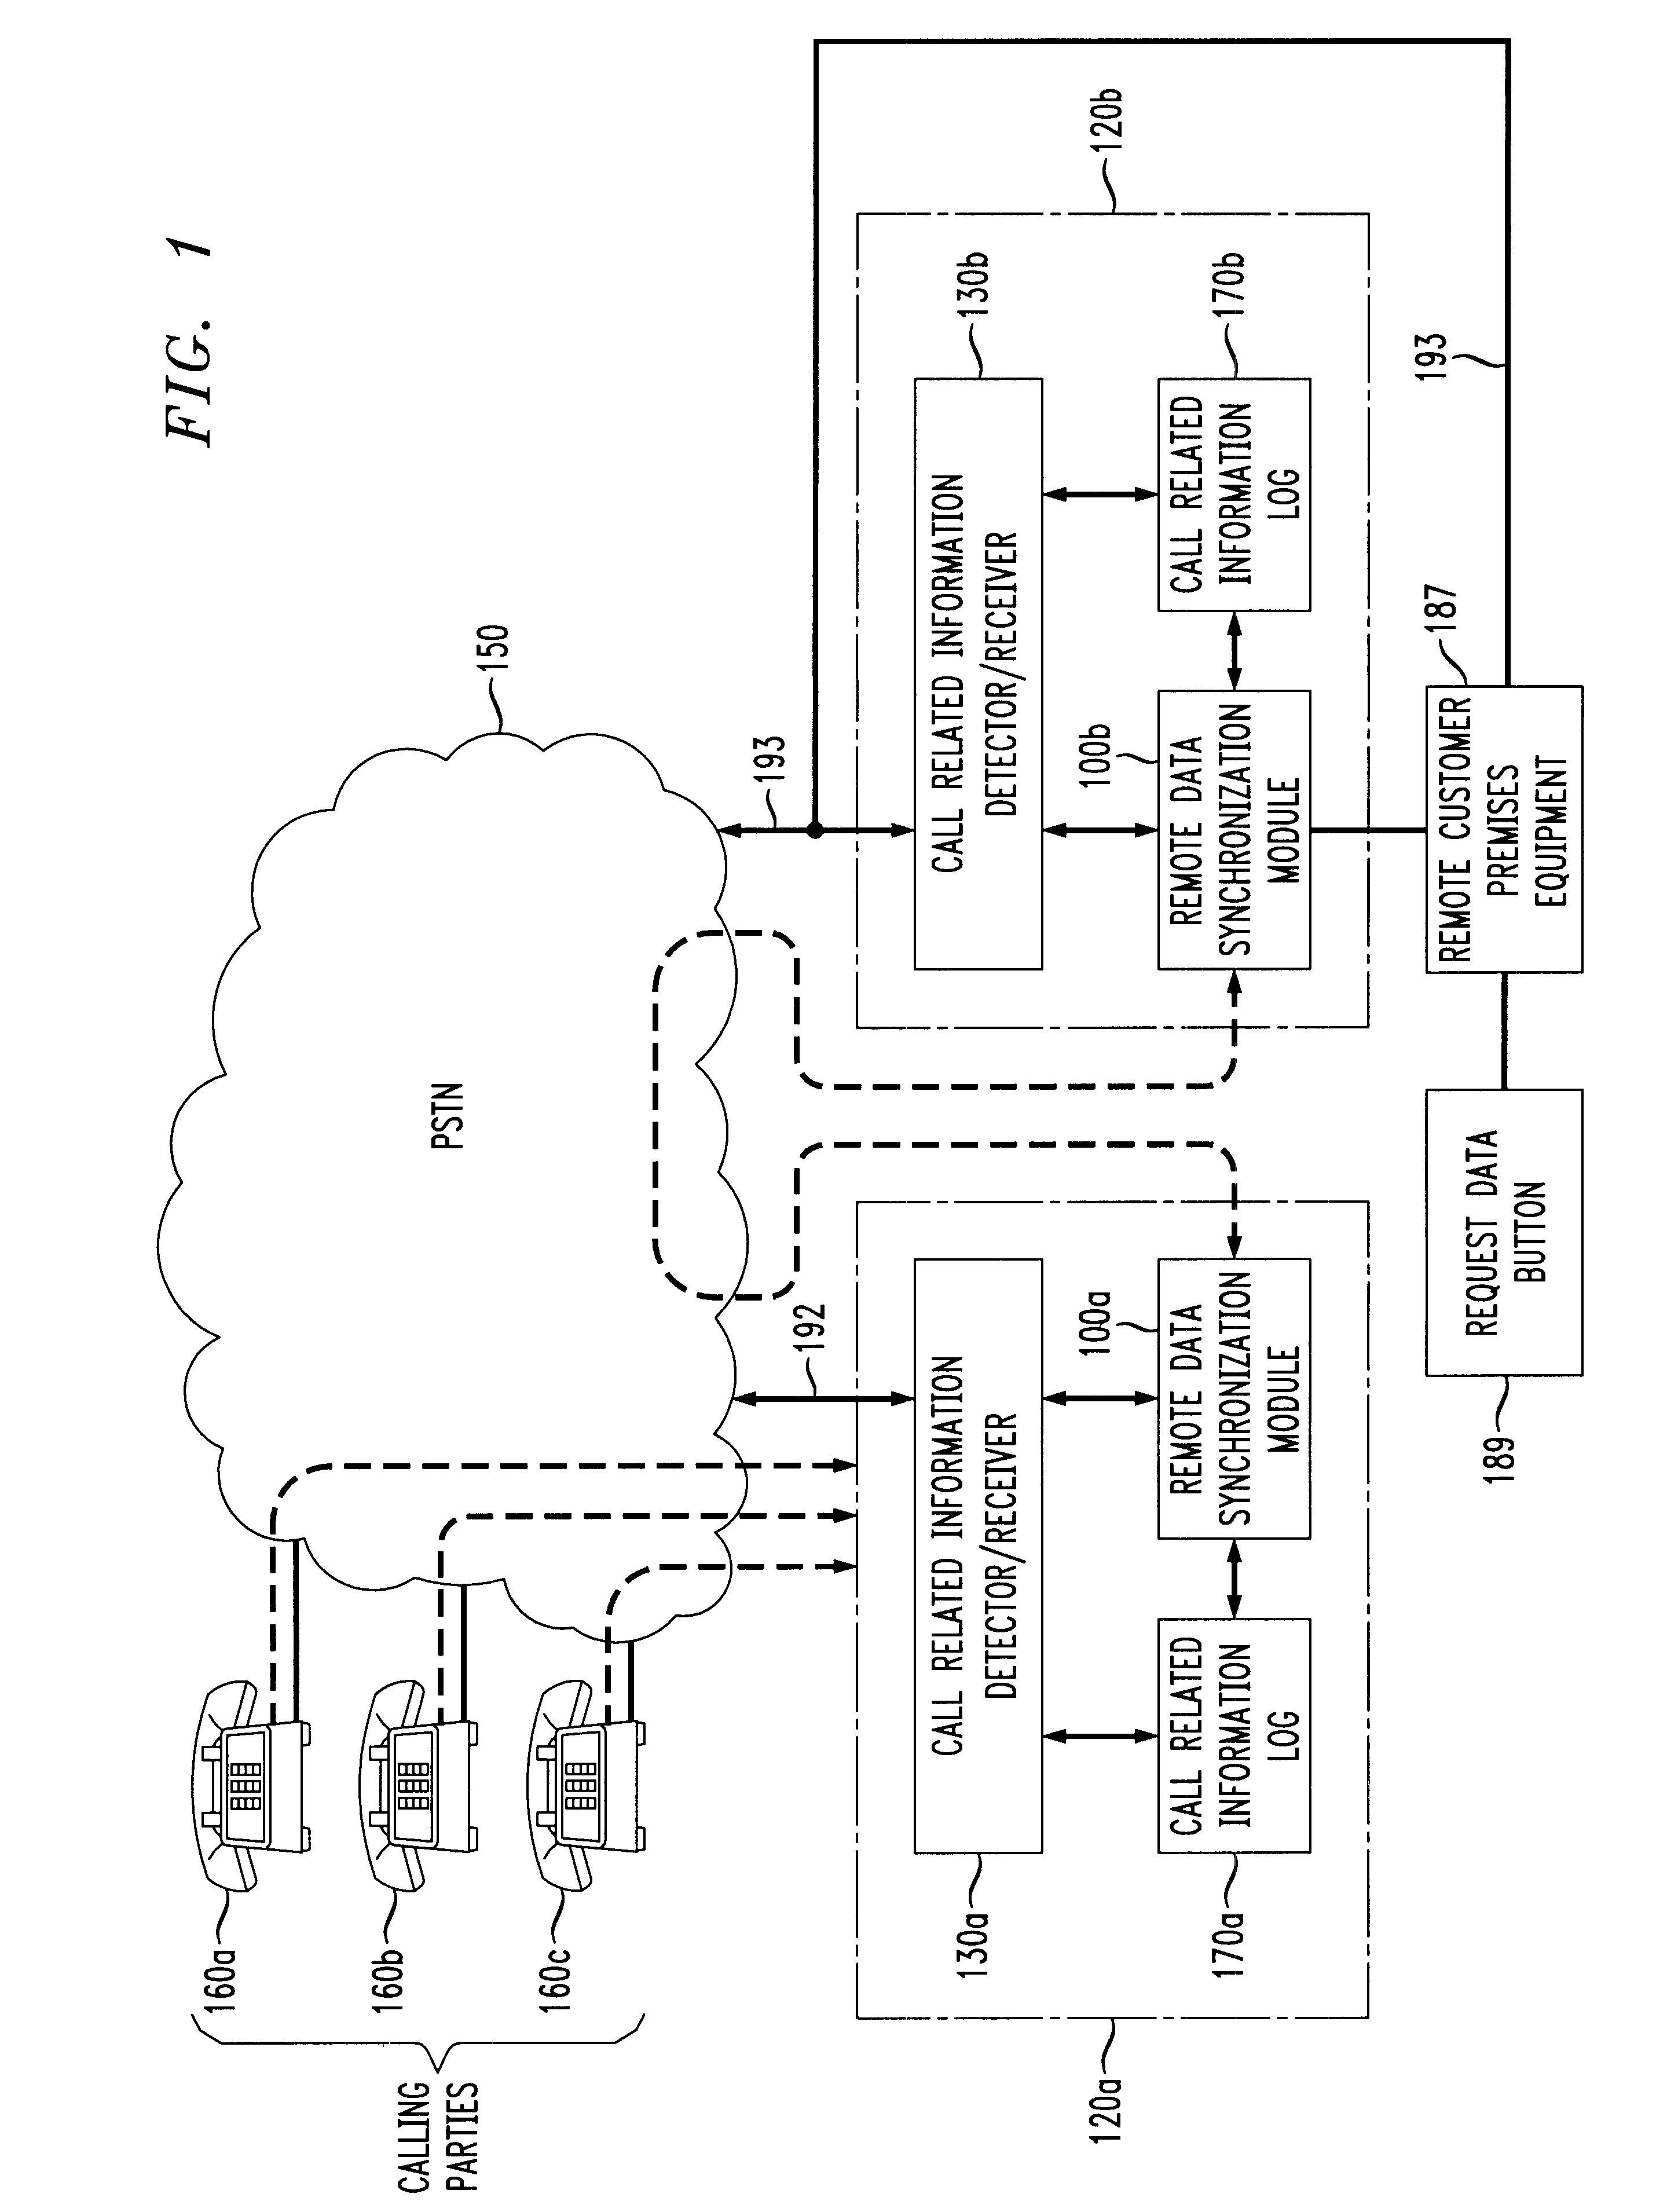 Call related information receiver to receiver transfer